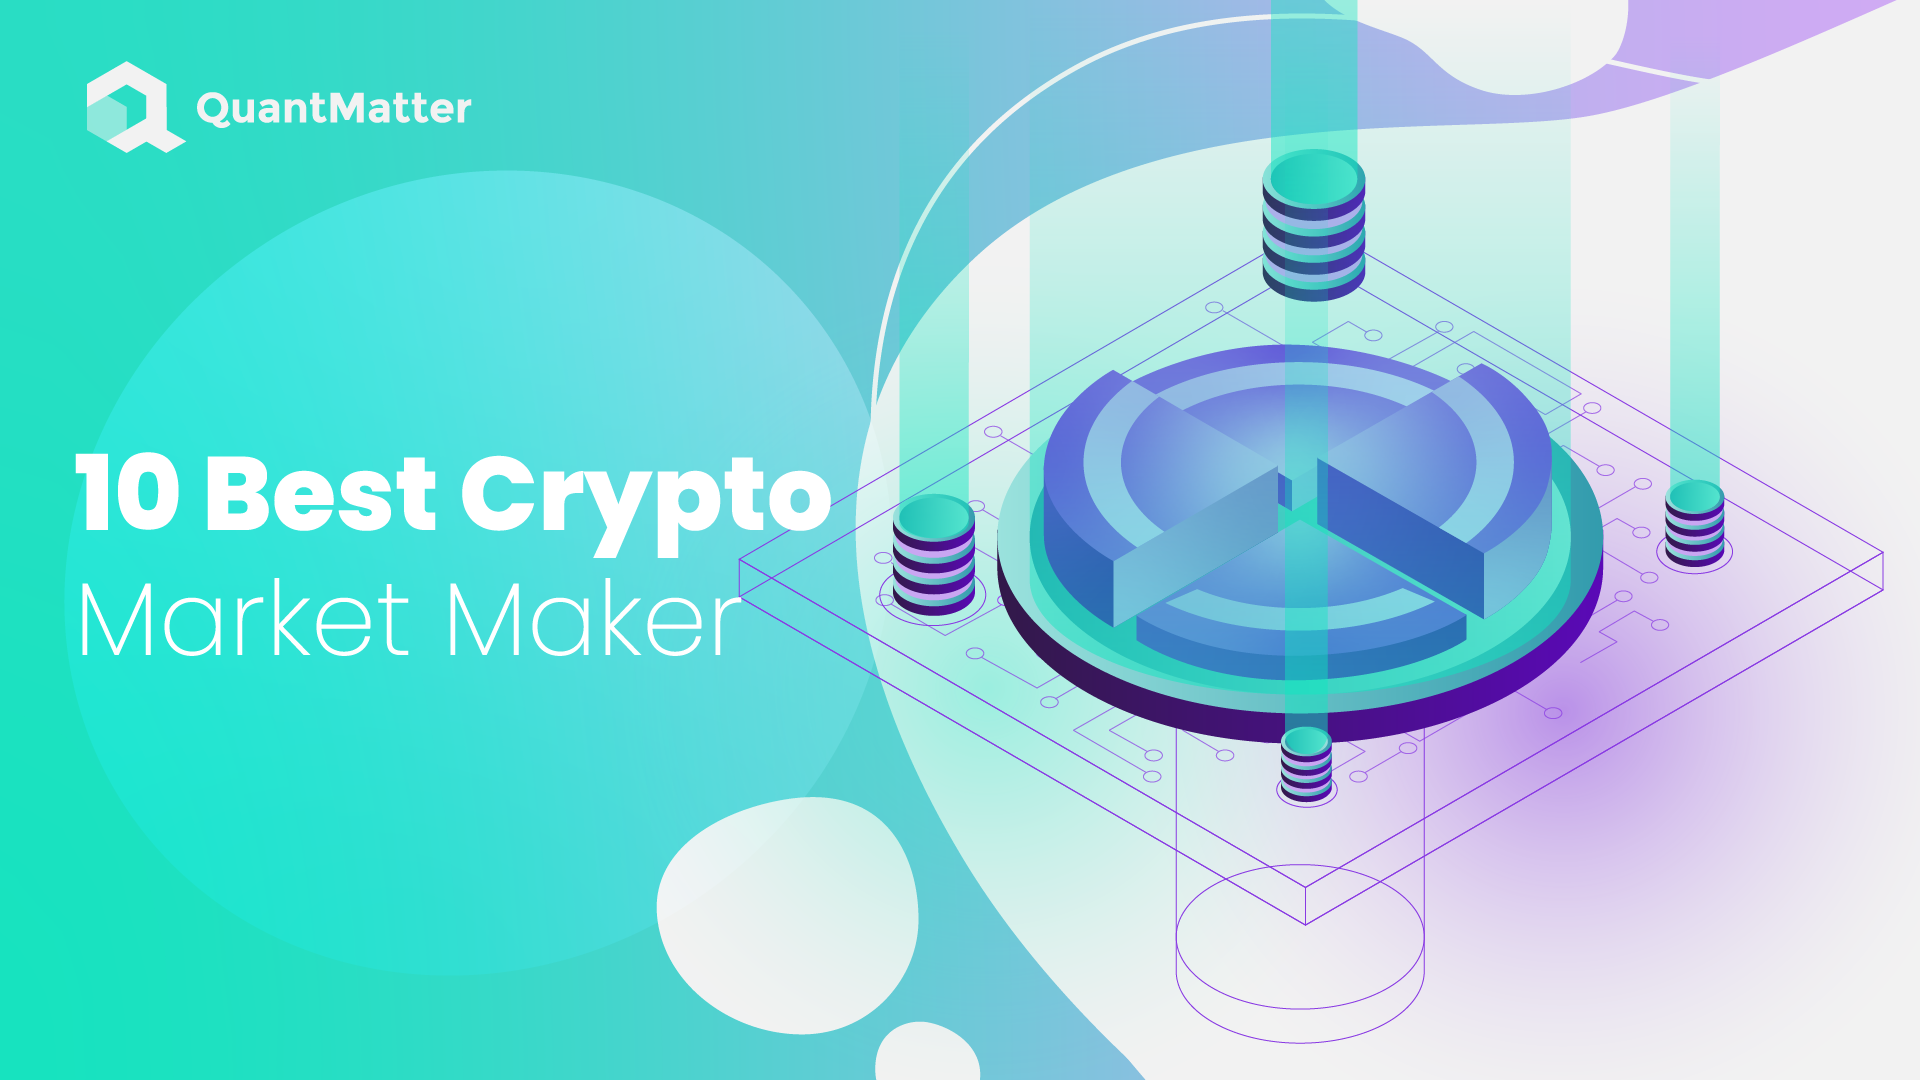 Market　Quant　Crypto　21　2023　in　Best　Makers　Matter